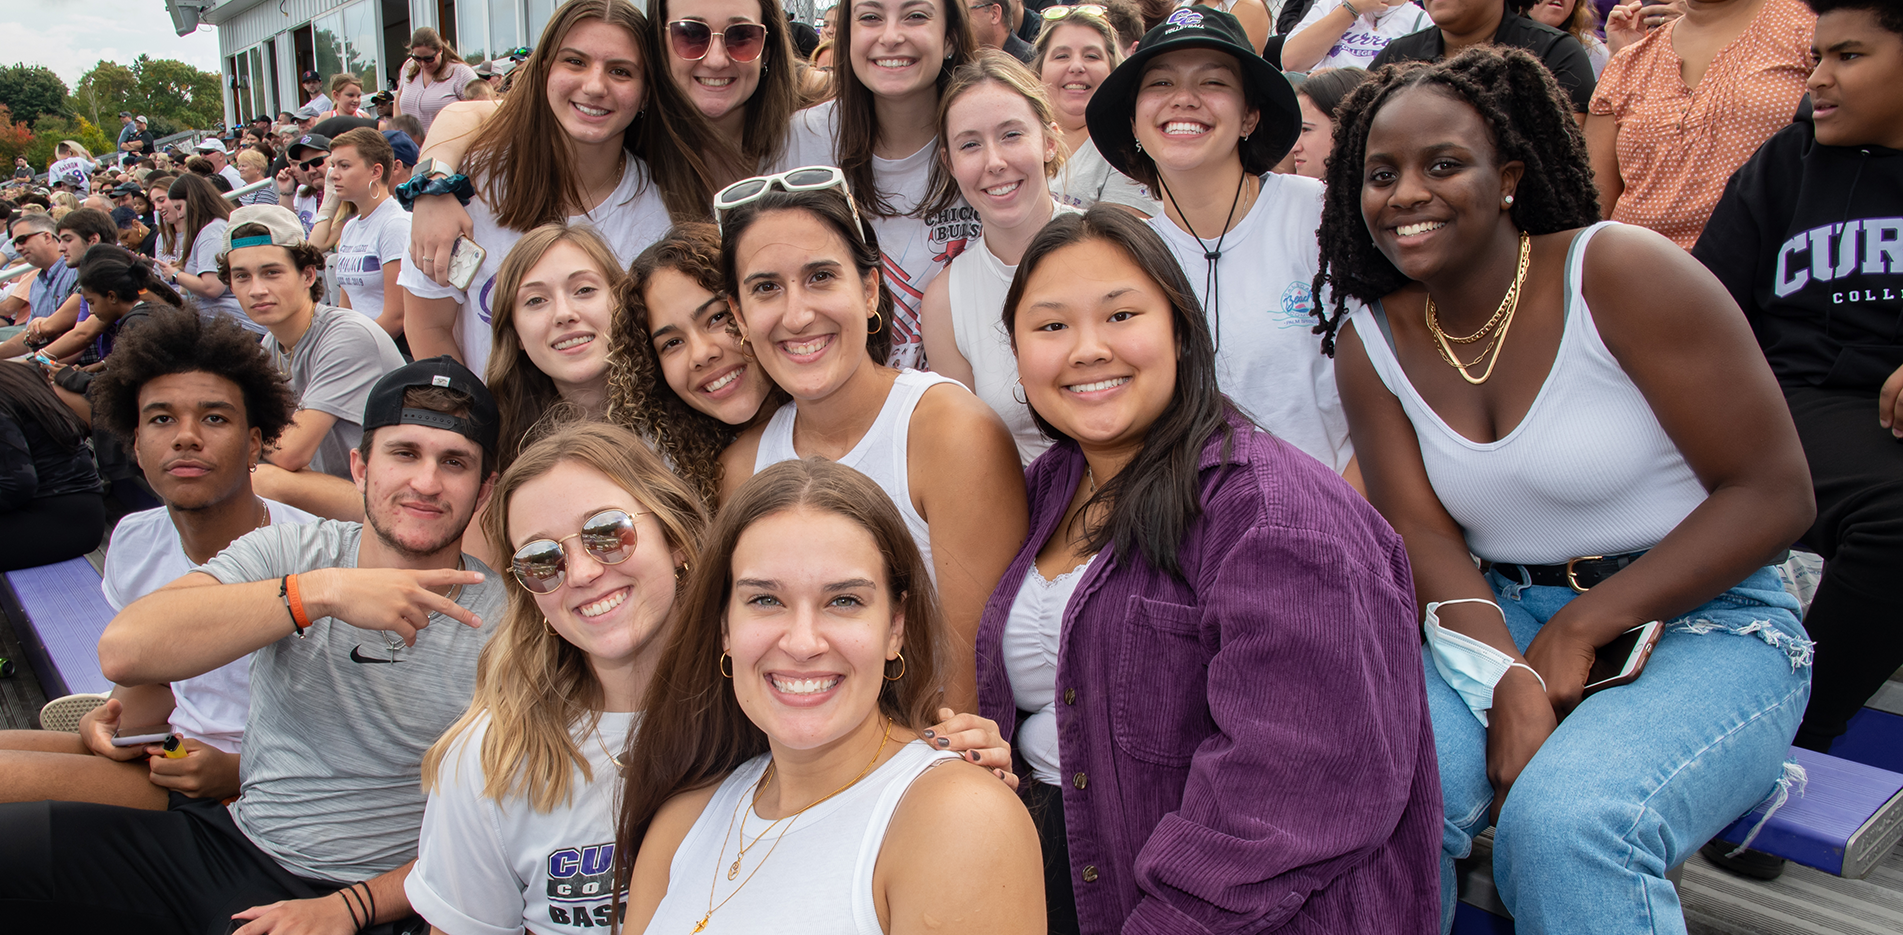 Curry College Alumni pose for a photo at Homecoming